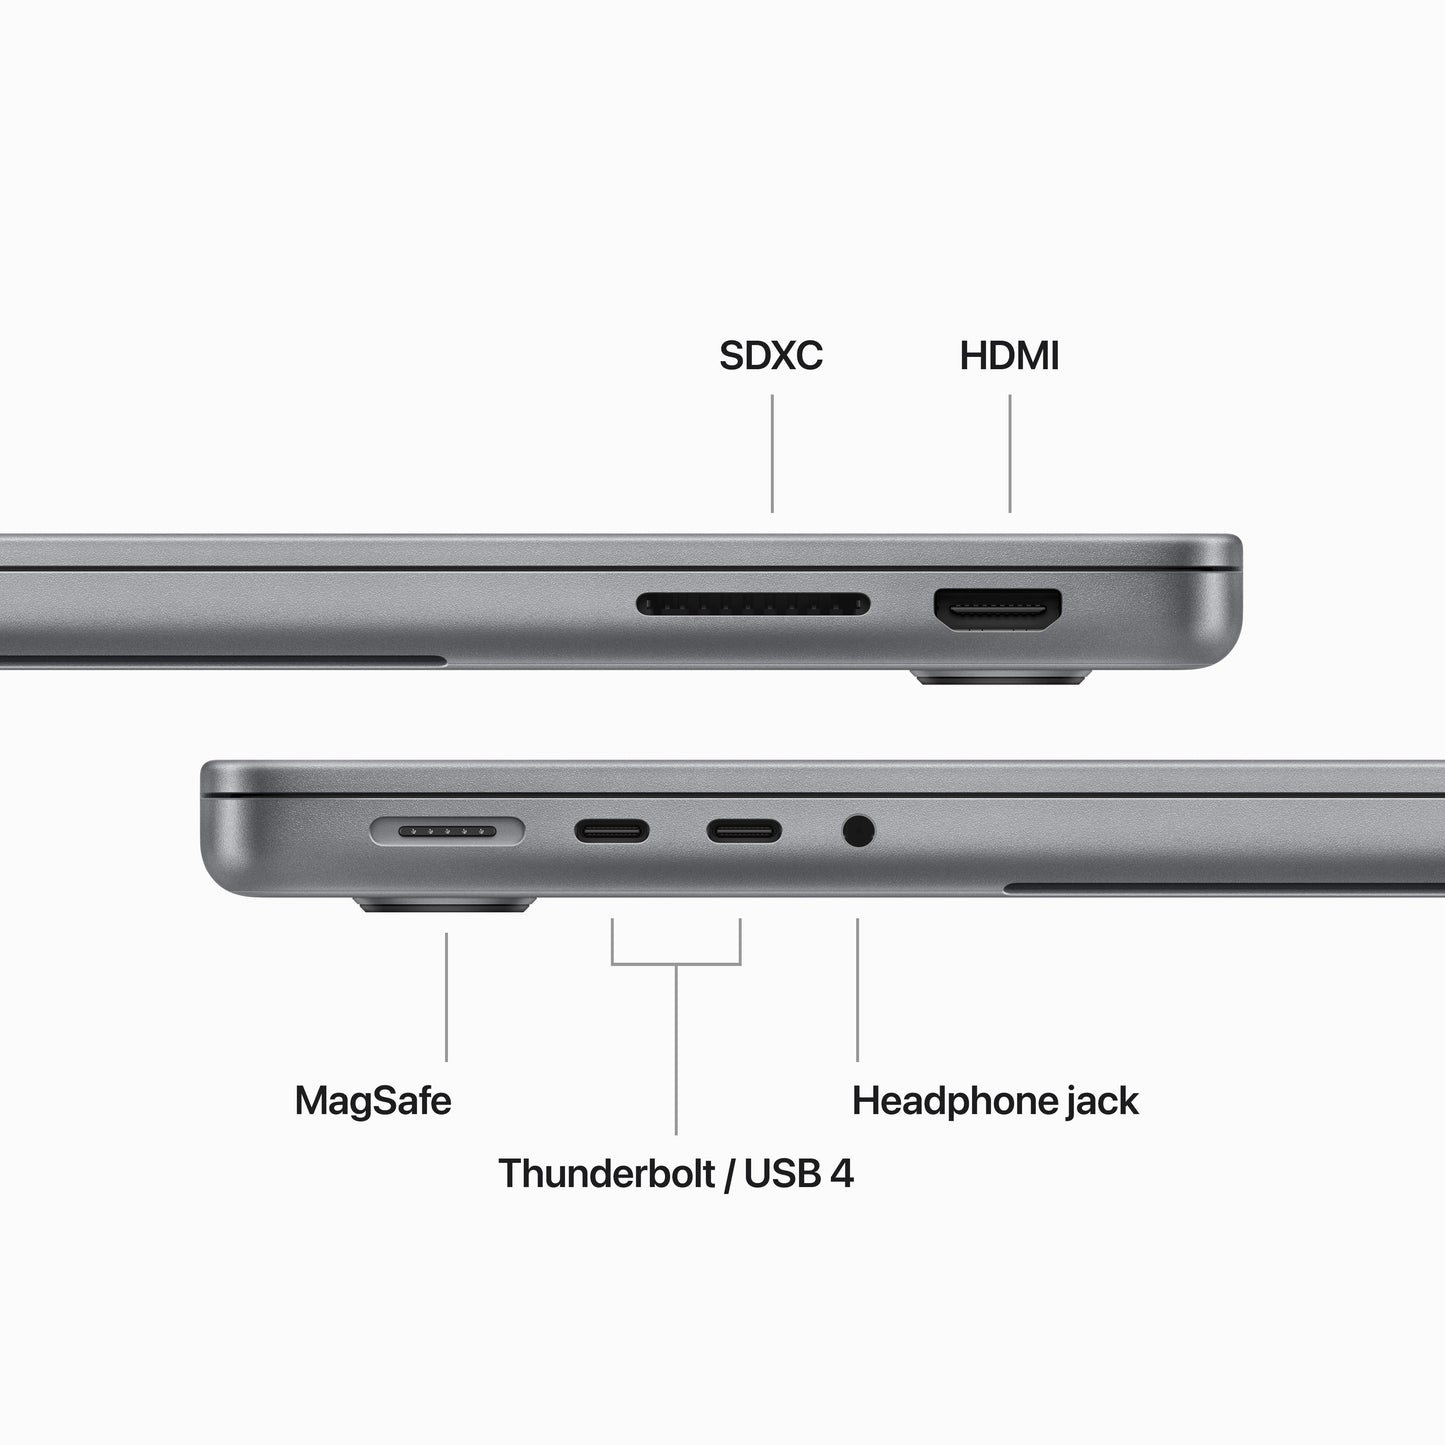 14-inch MacBook Pro: Apple M3 chip with 8‑core CPU and 10‑core GPU, 1TB SSD - Space Gray